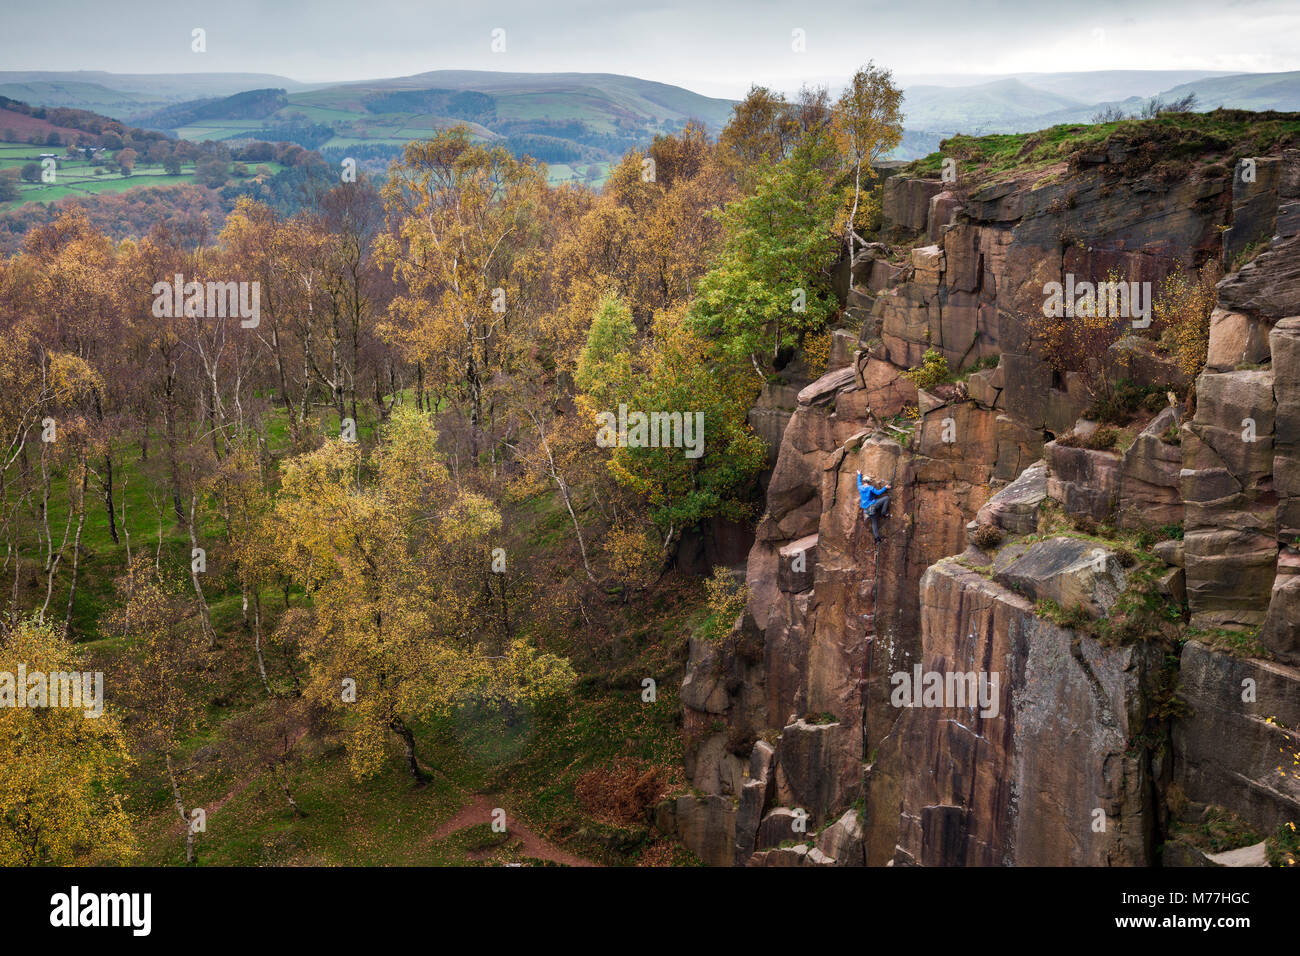 A rock climber ascends a cliff face formed by historic quarrying at Bole hill quarry on an autumn day in the Peak District, Derbyshire, England, UK Stock Photo